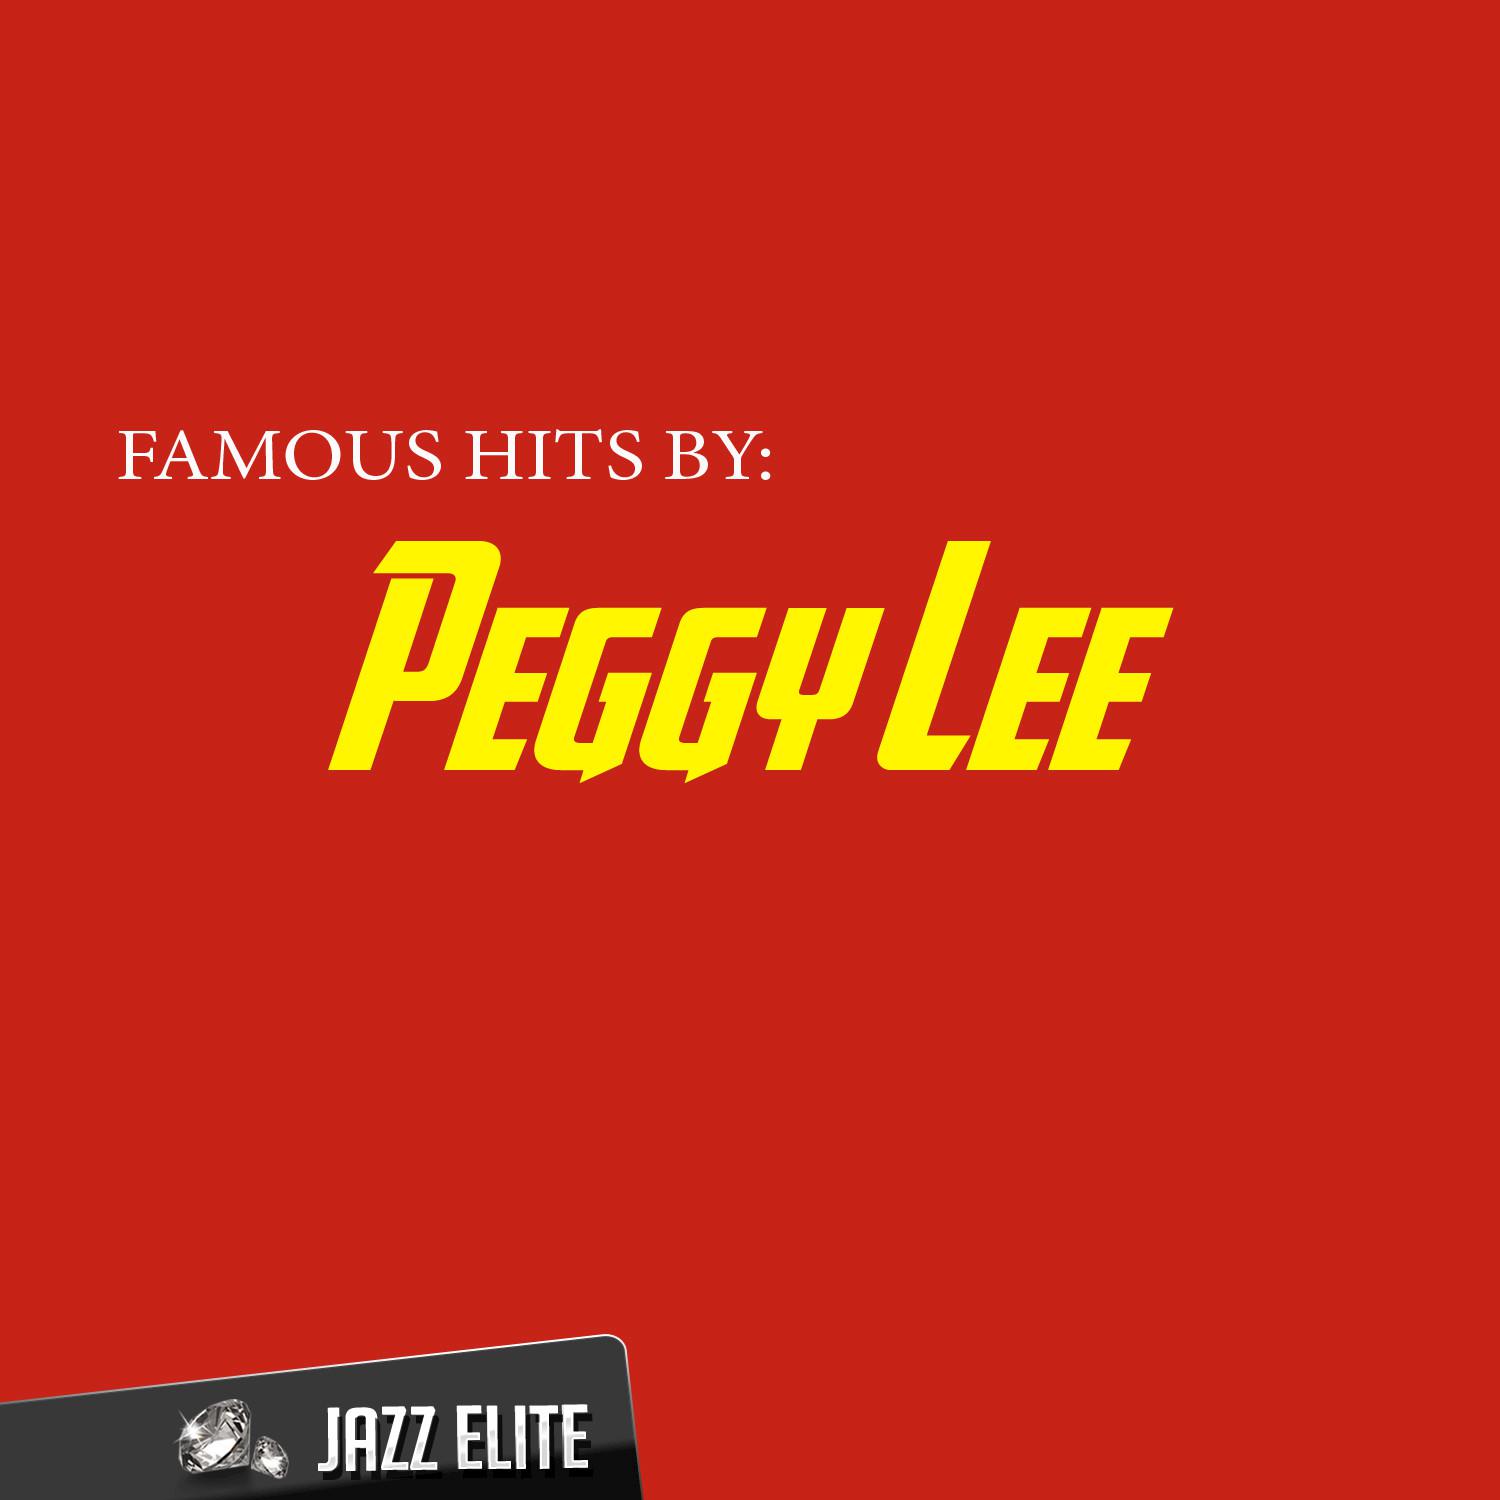 Famous Hits by Peggy Lee